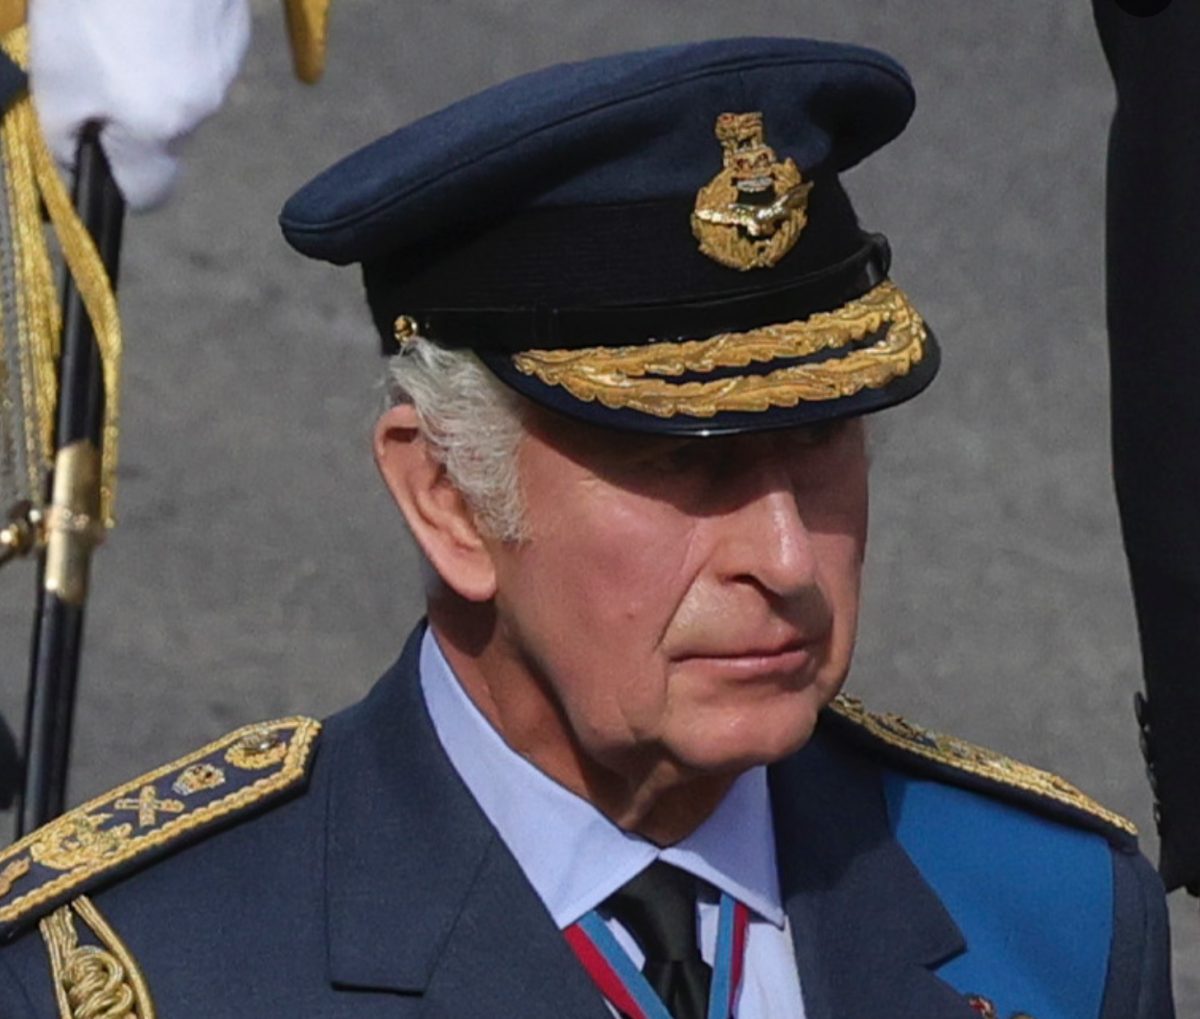 King Charles wearing his military uniform. British royalty is encouraged to serve in the armed forces (Photo by S. Dawson). 